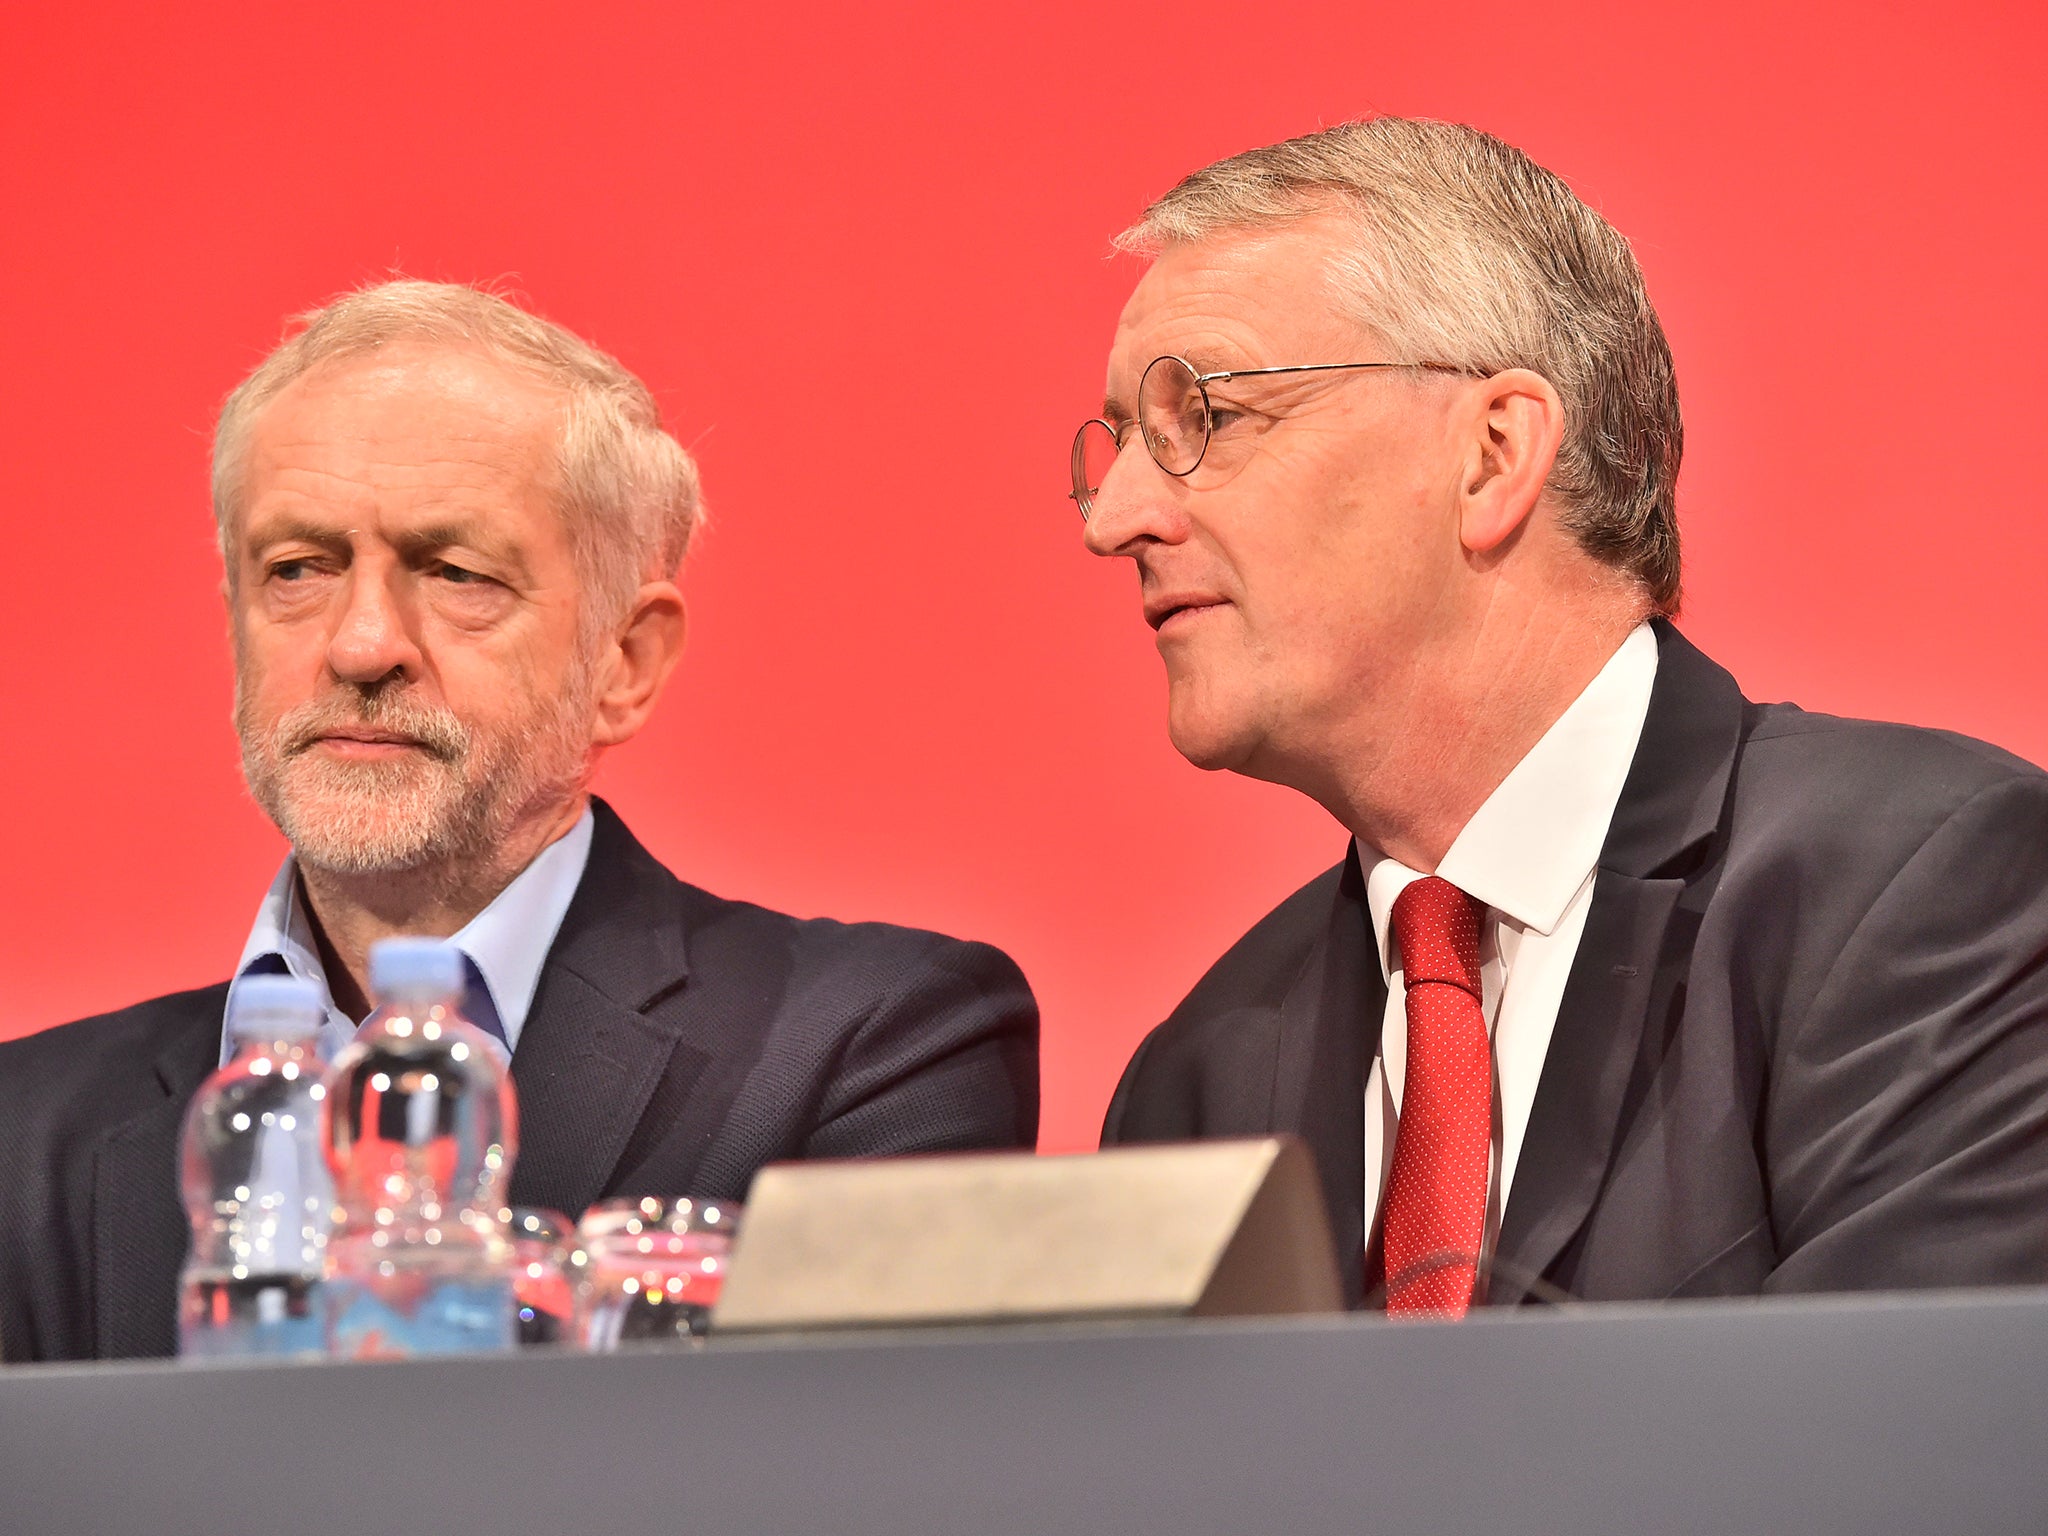 While Jeremy Corbyn will open the debate opposing the Syria plan's, Hilary Benn will set out the case in favour